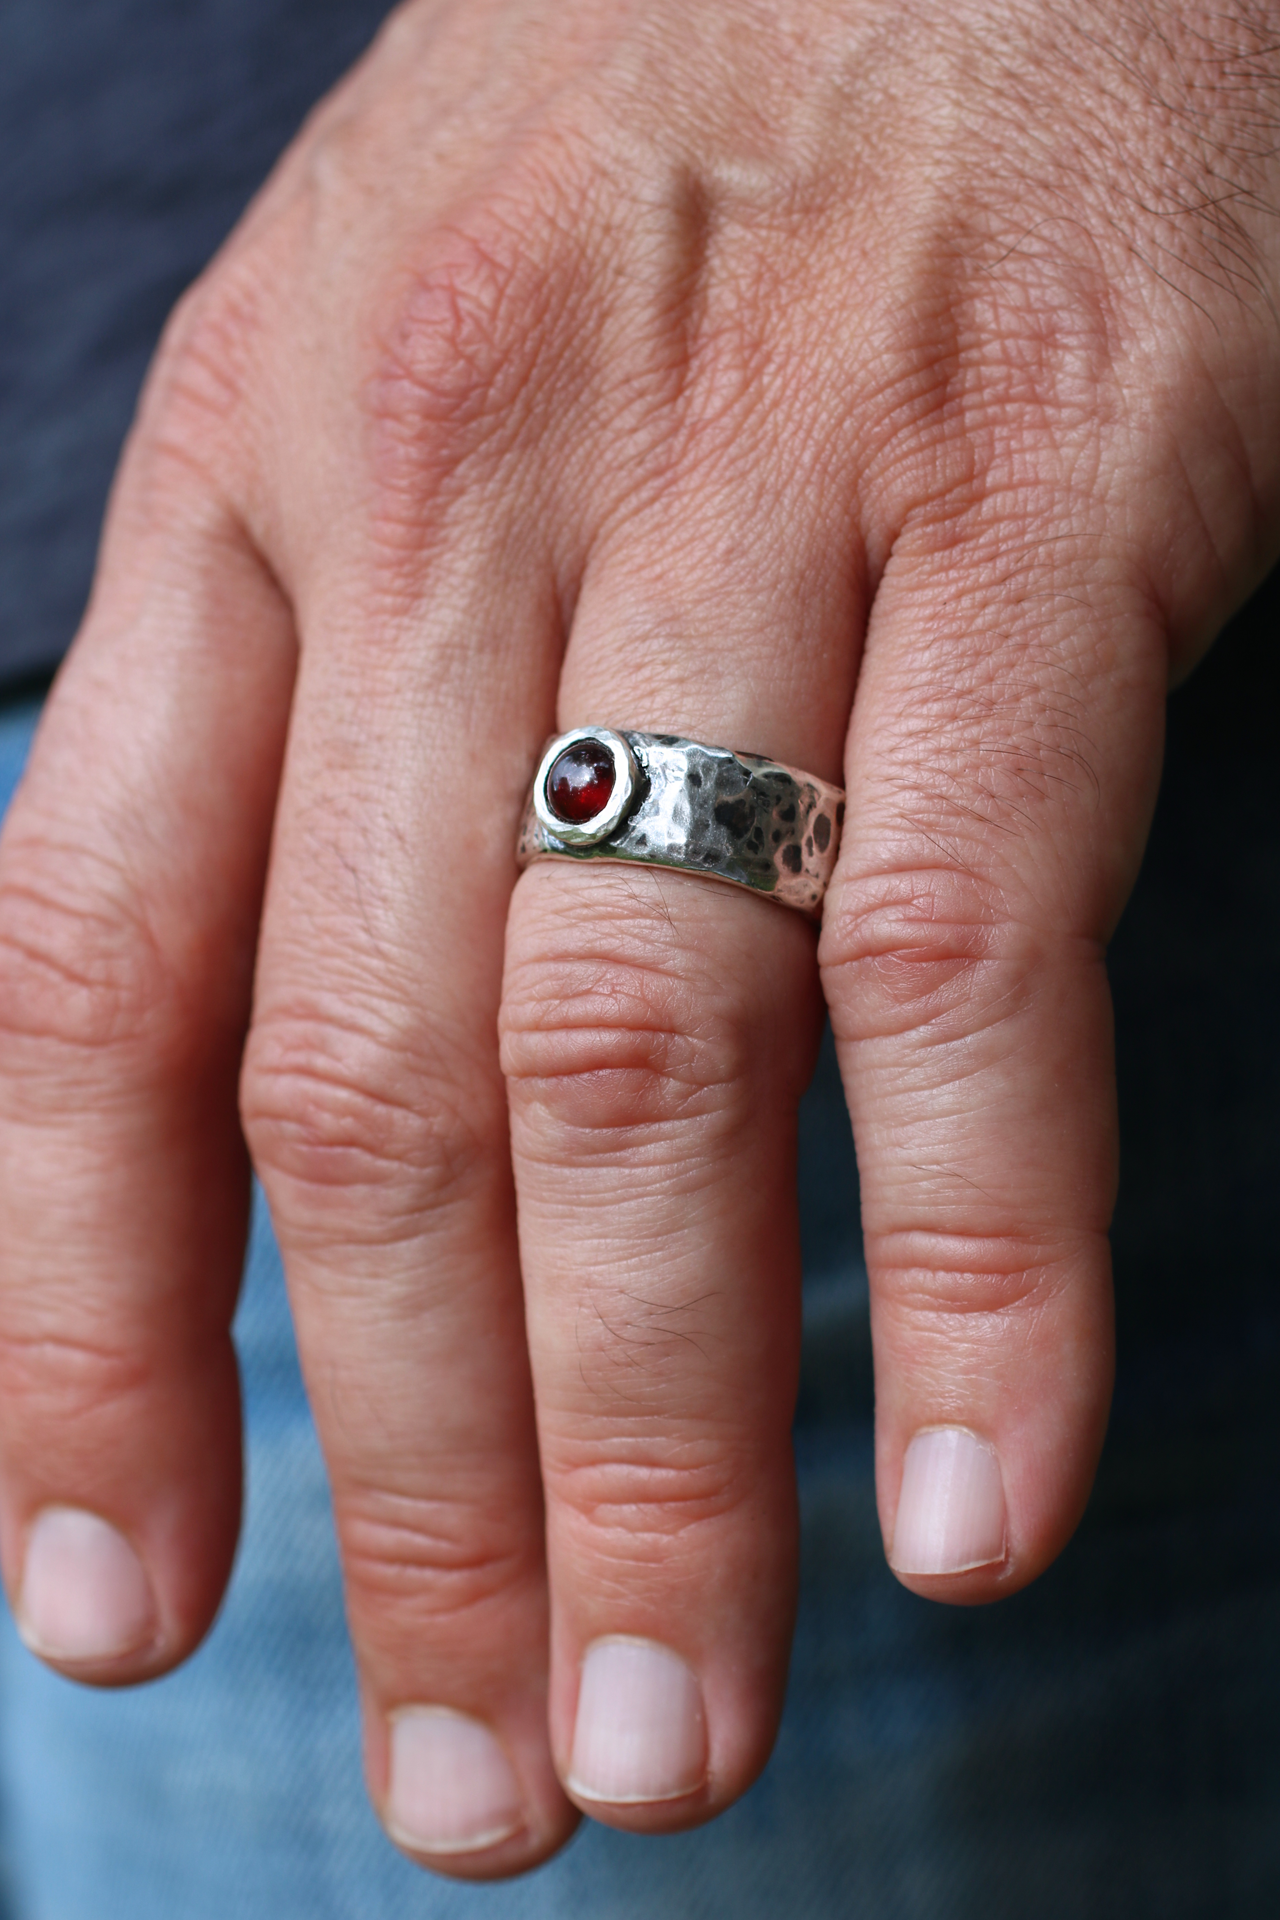 Amazon.com: Foxtail Chain Design 925 Sterling Silver Garnet Stone Men's Ring,  Handmade Silver Ring for Men, Red Garnet Stone Ring, Man Silver Garnet  Stone Ring : Handmade Products